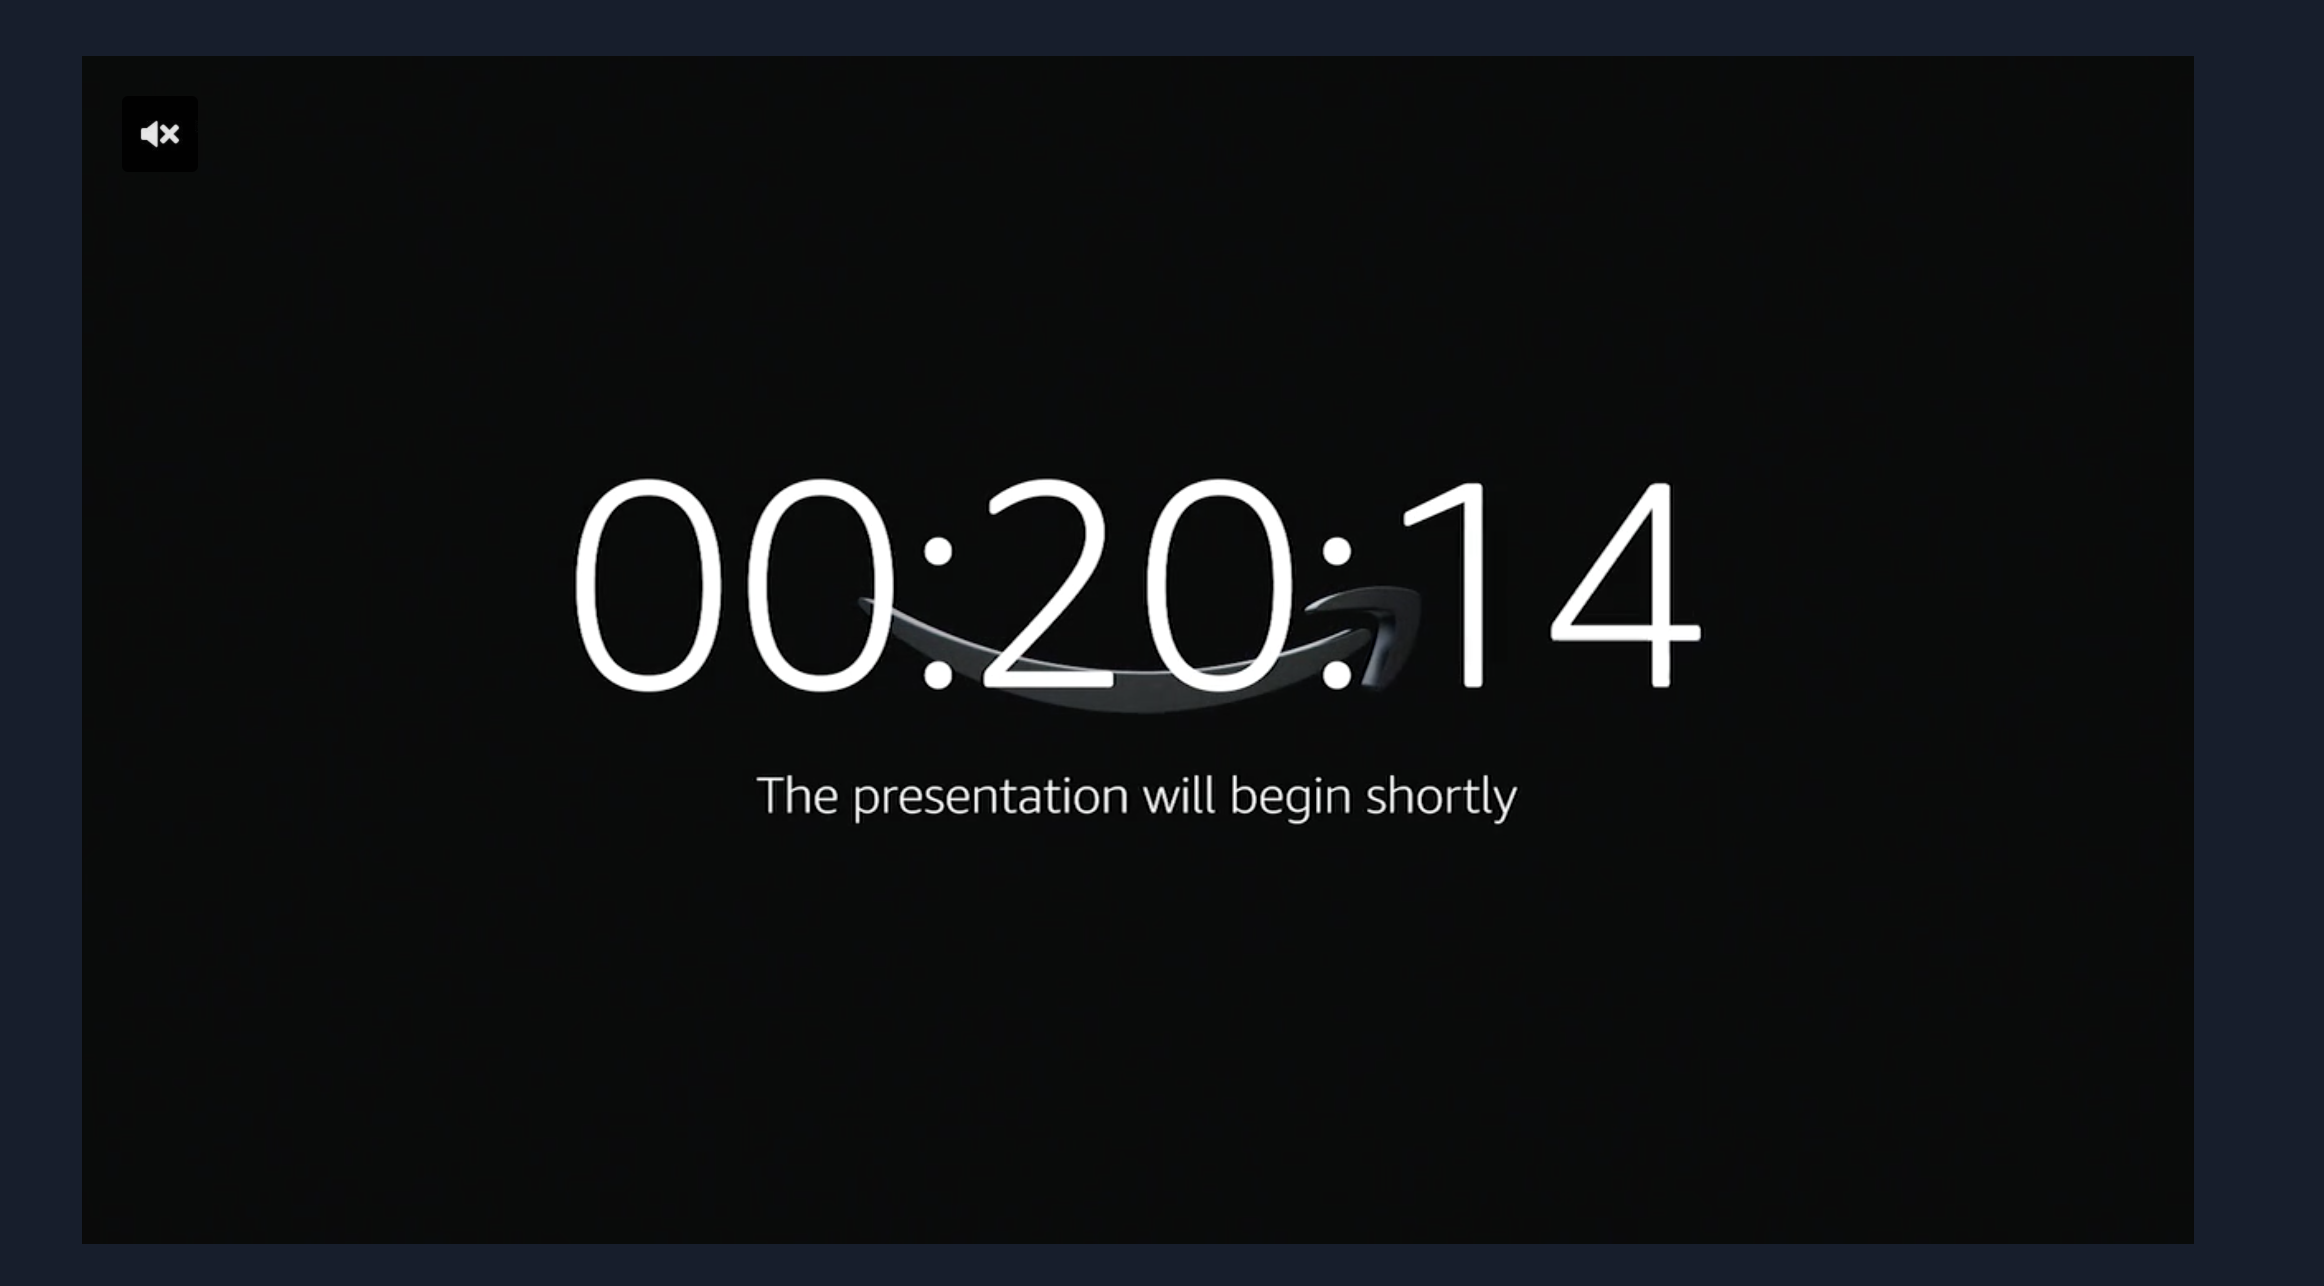 Amazon event live blog, the countdown is on!